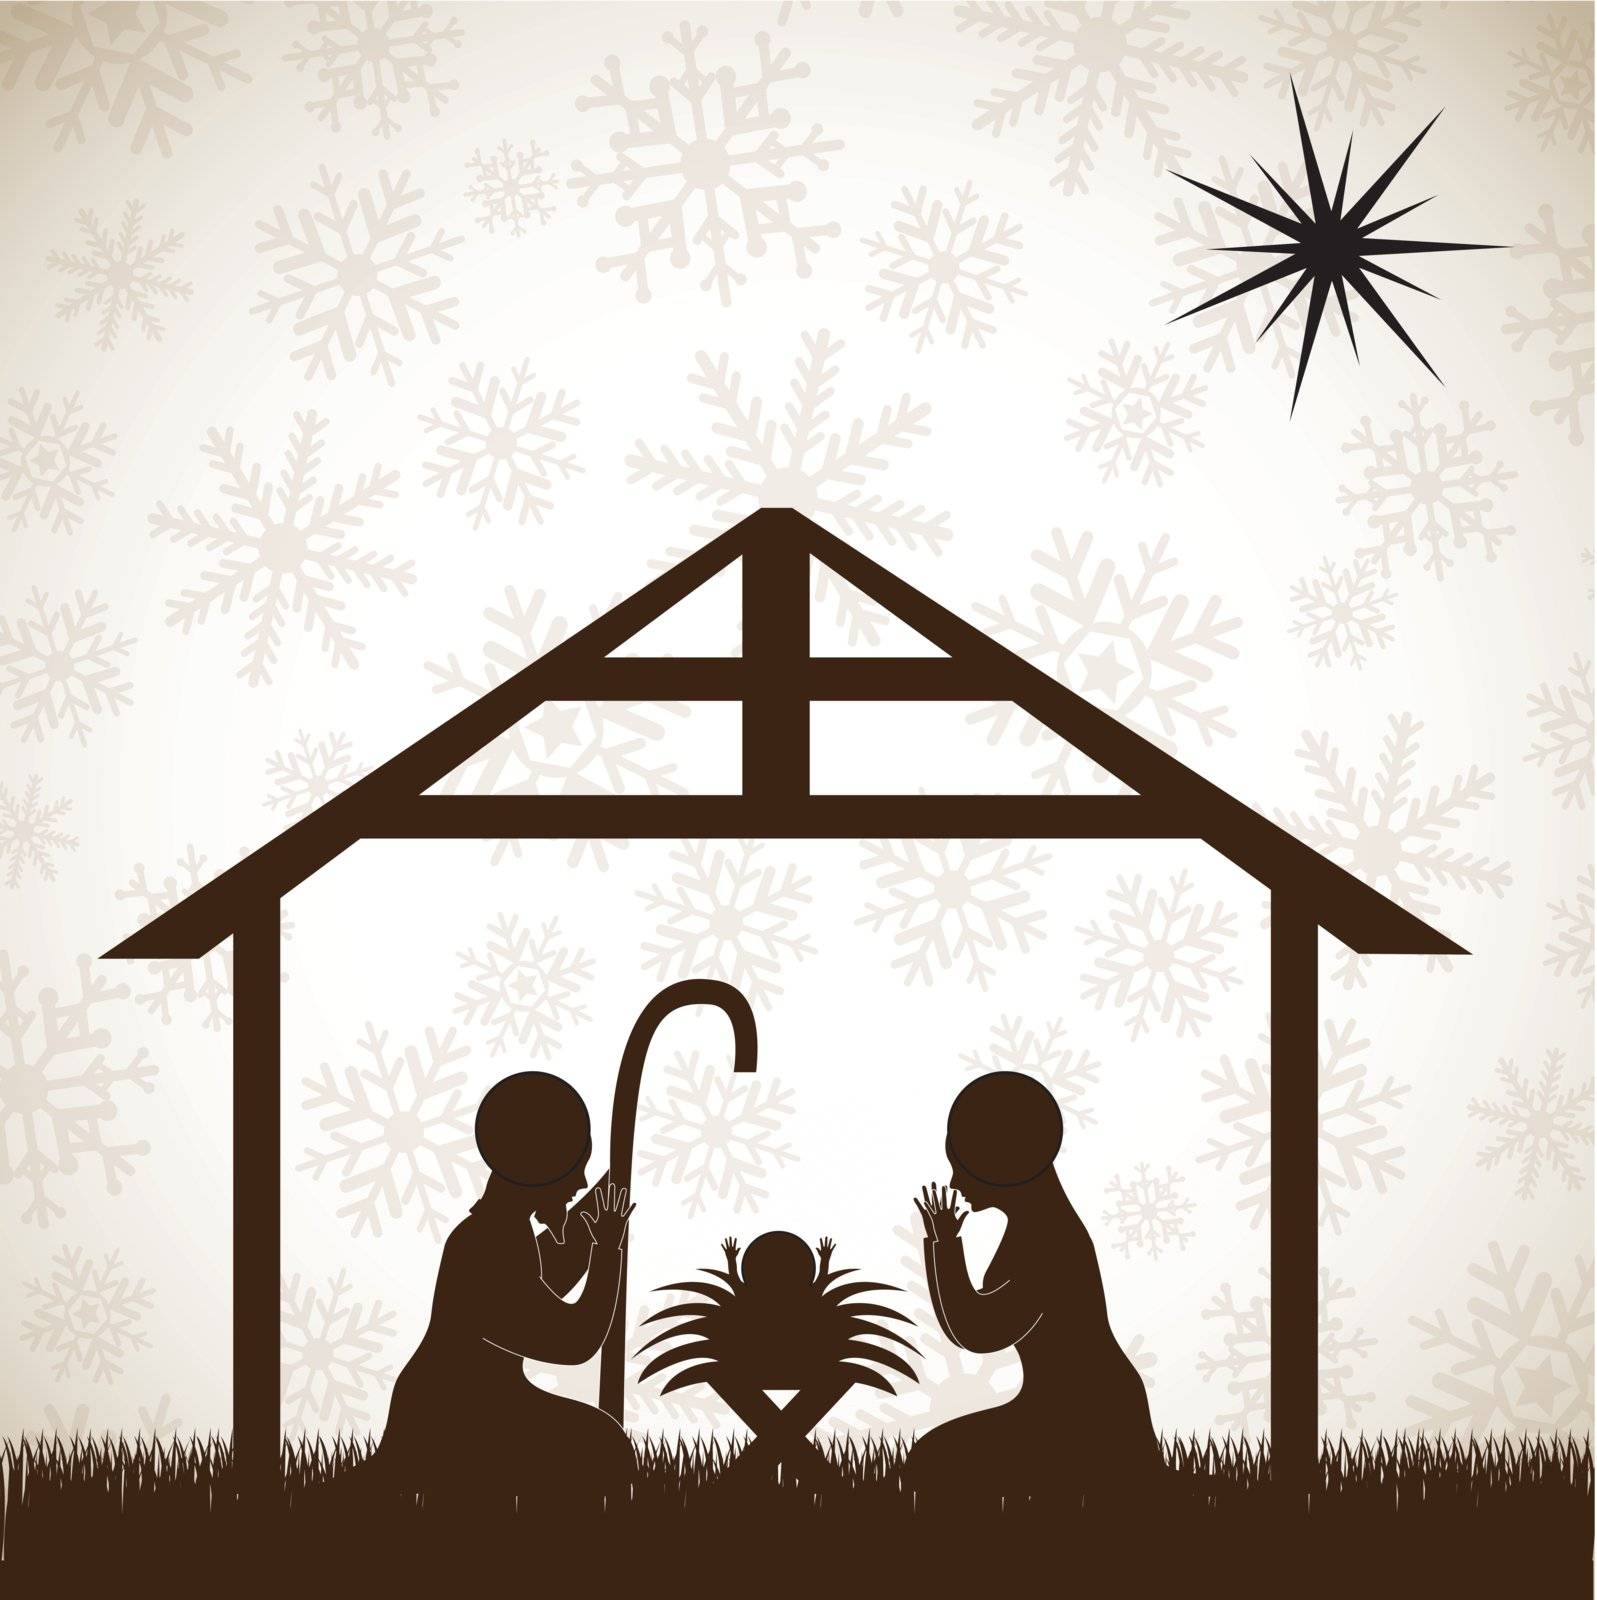 beautiful crib brown, Christmas image over white background